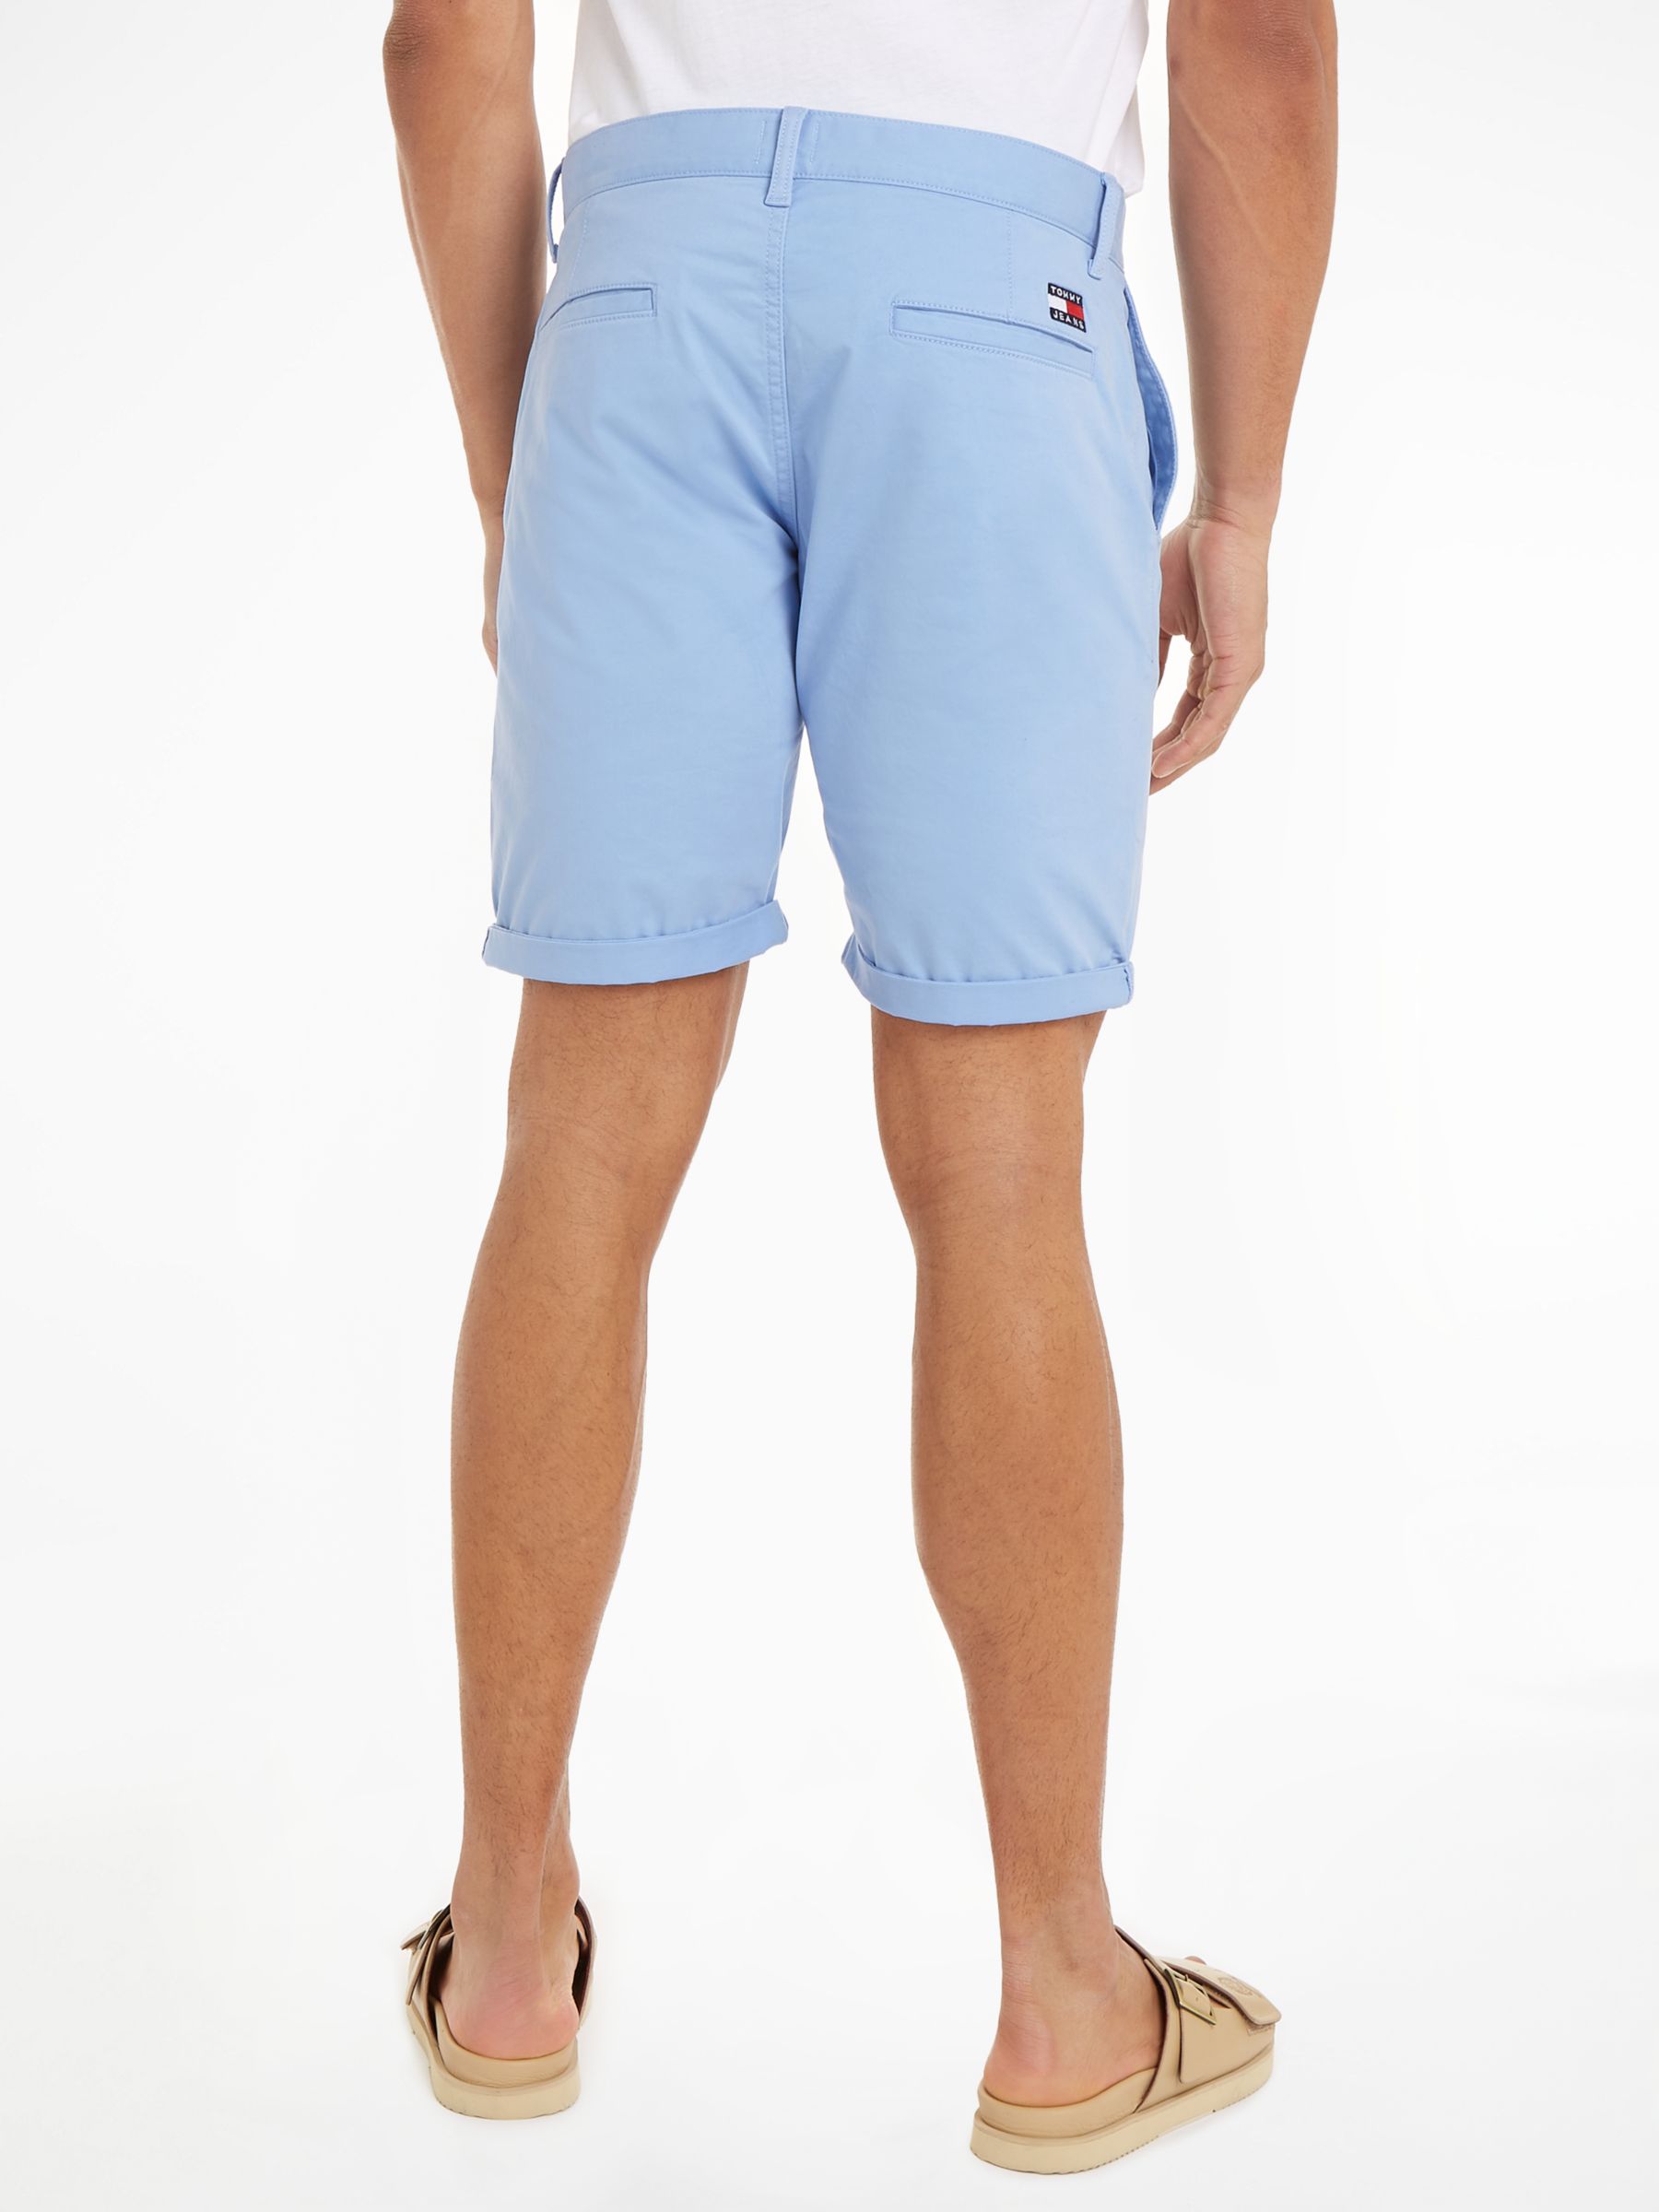 Buy Tommy Jeans Scanton Chino Shorts Online at johnlewis.com